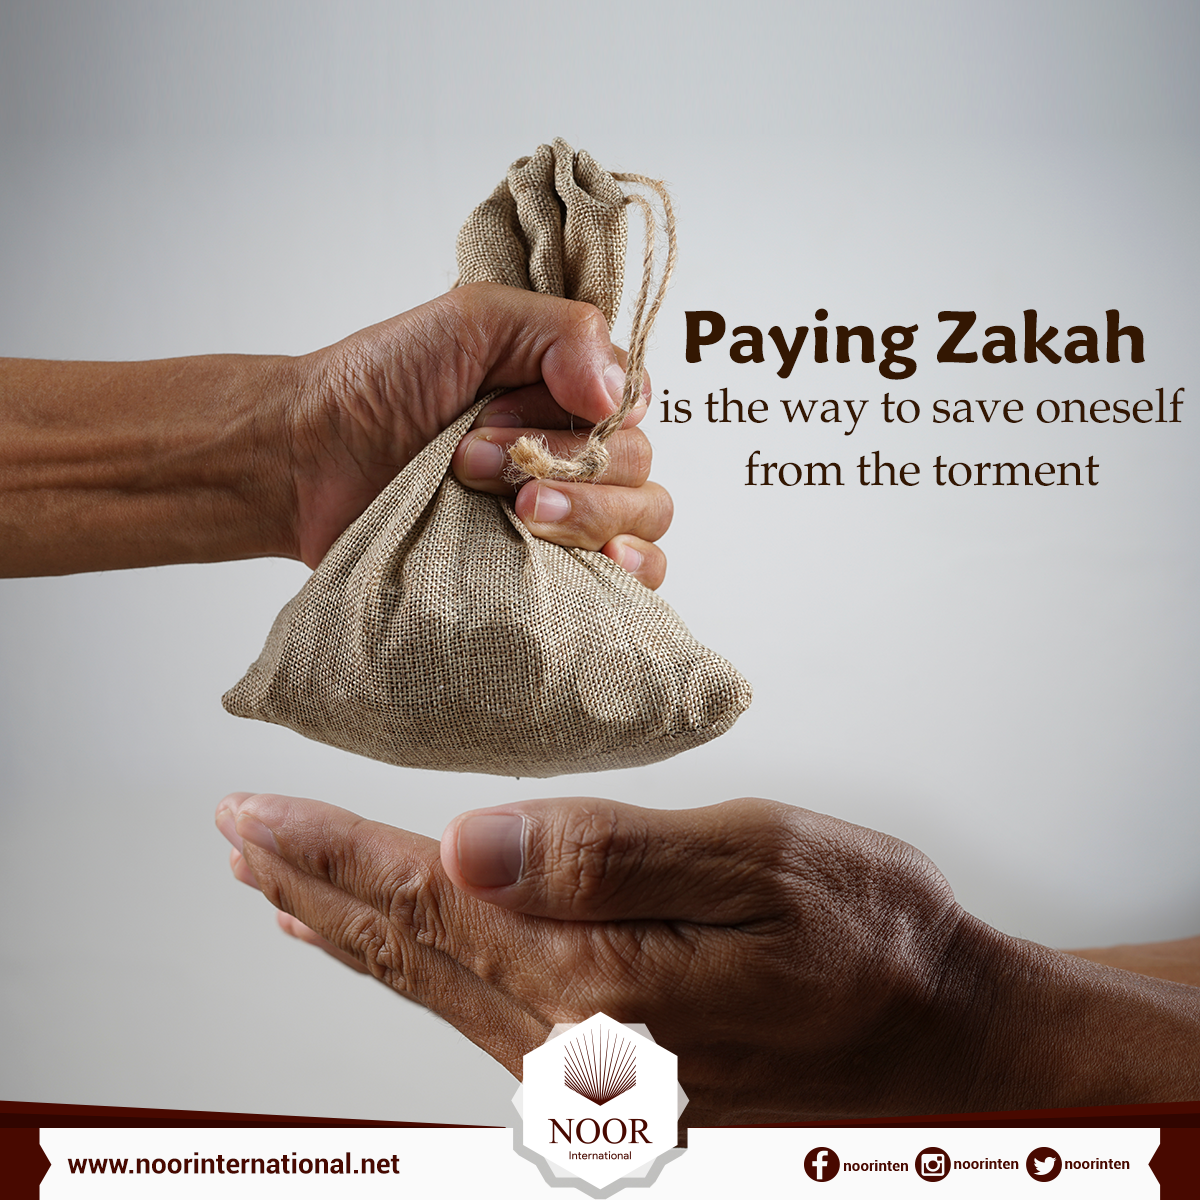 Paying Zakah is the way to save oneself from the torment